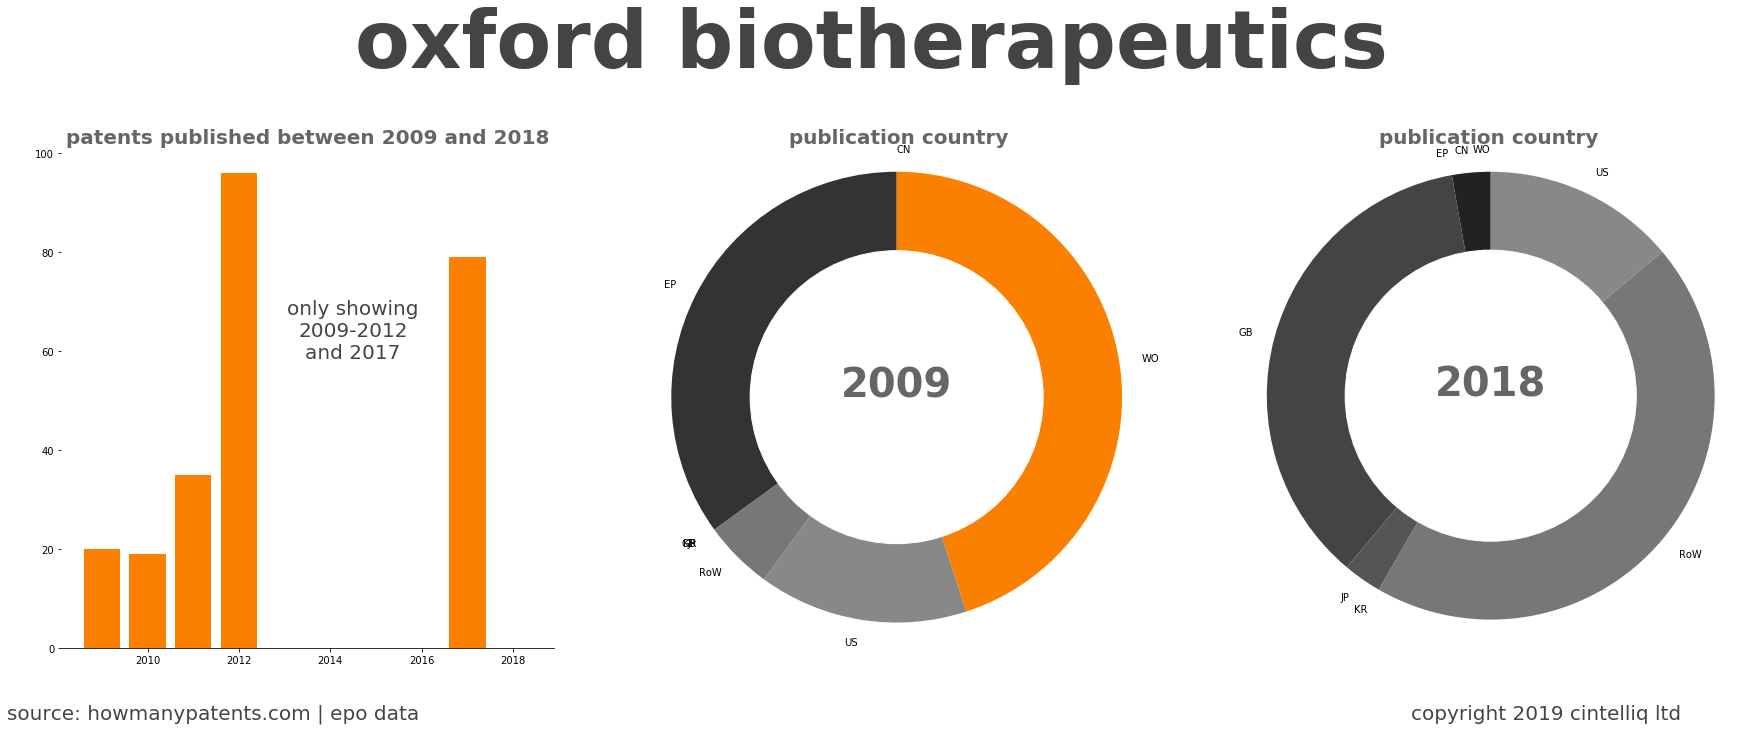 summary of patents for Oxford Biotherapeutics